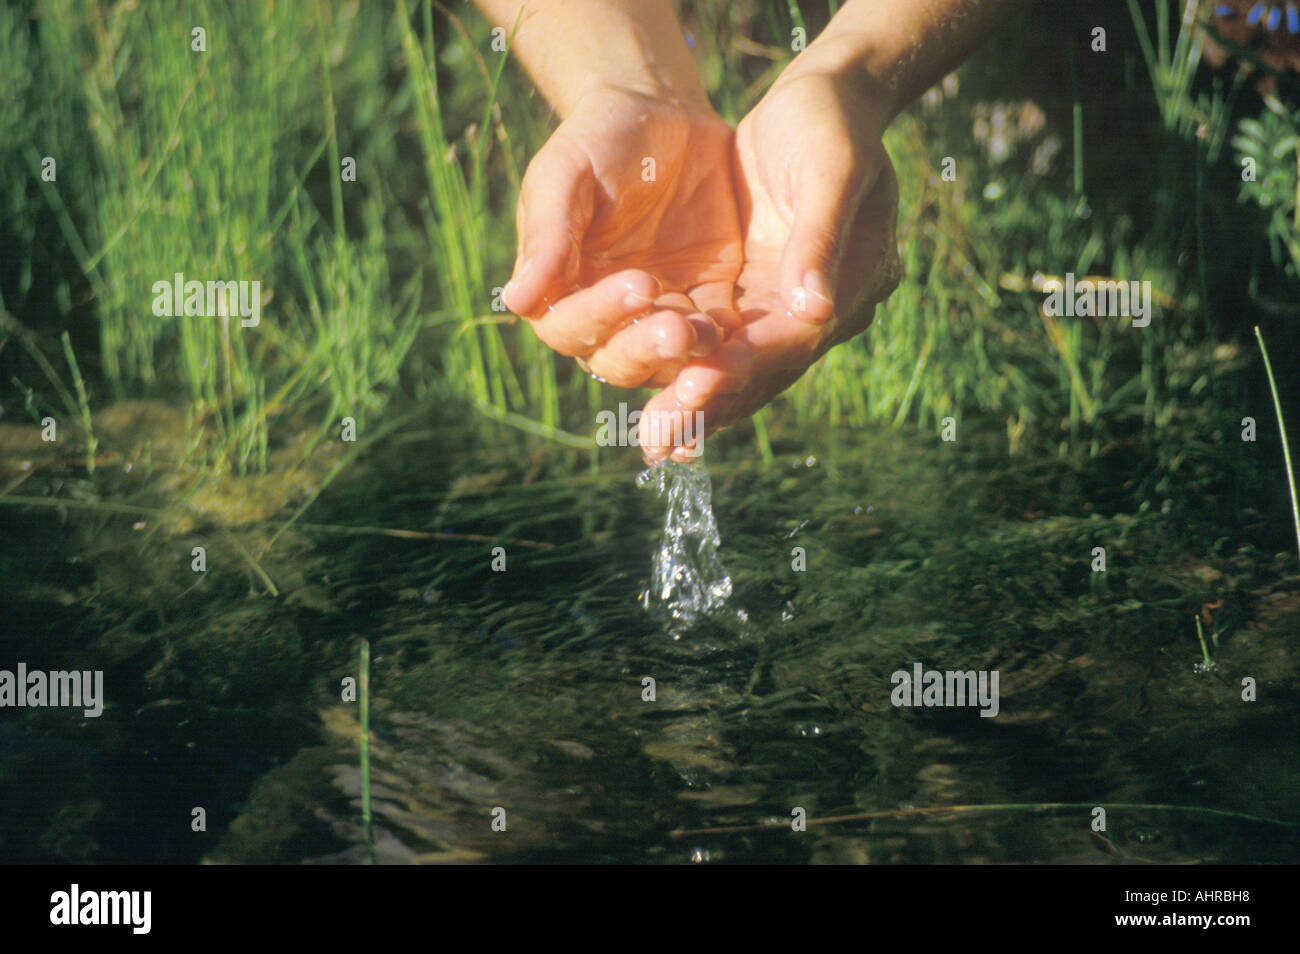 A pair of hands entering a river to get clean water Stock Photo